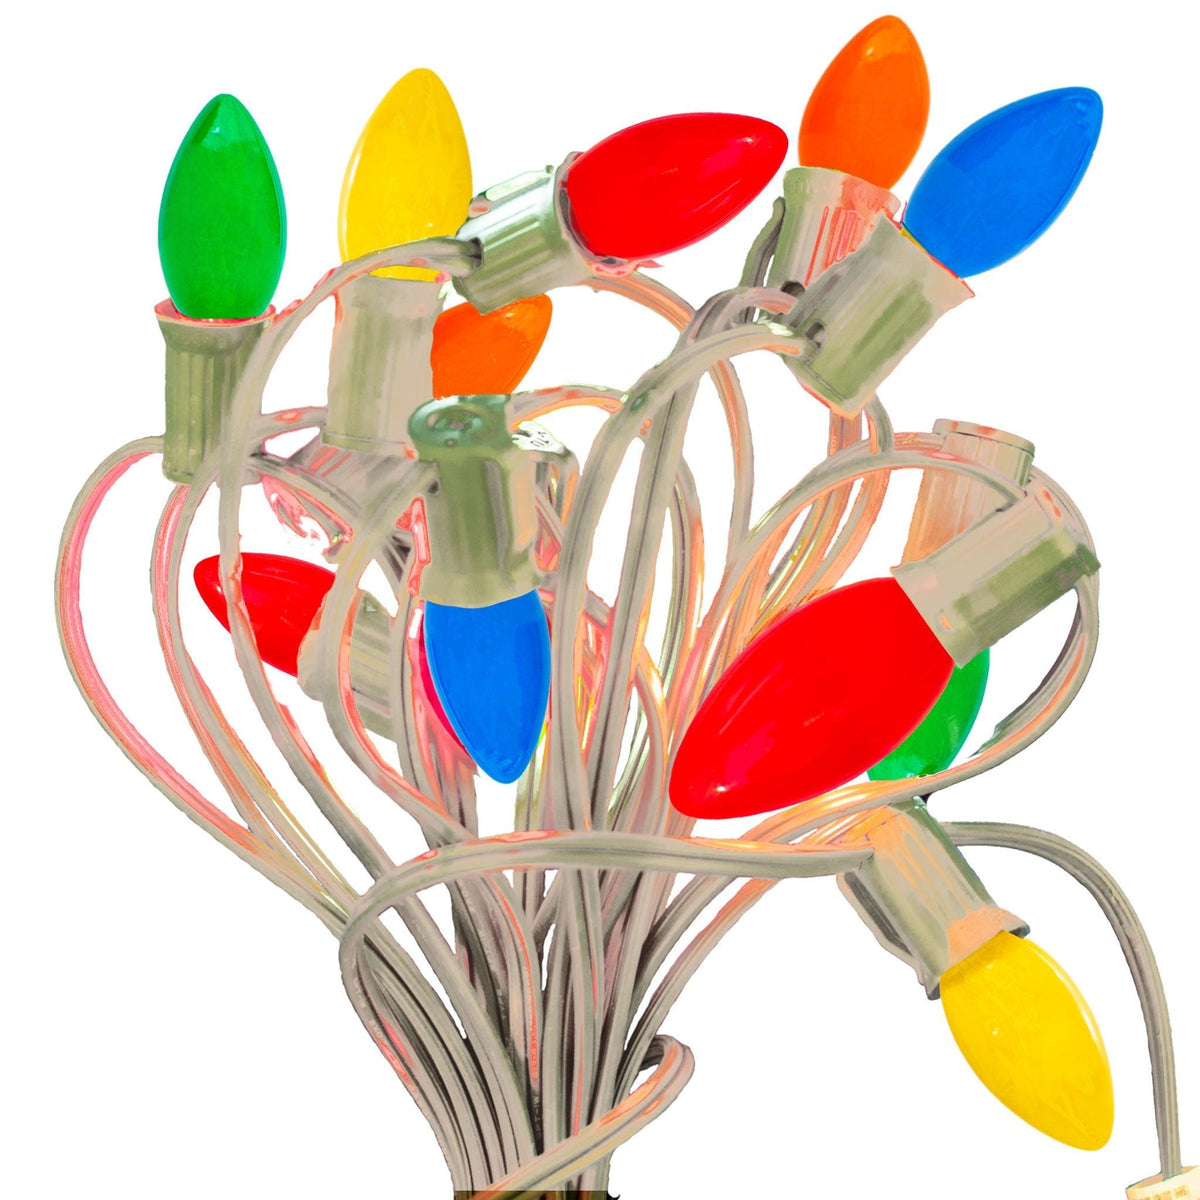 Lee Display offers your favorite Solid Ceramic Multi-Color Christmas Lights sold with a 25FT White Patio String Cord in a set